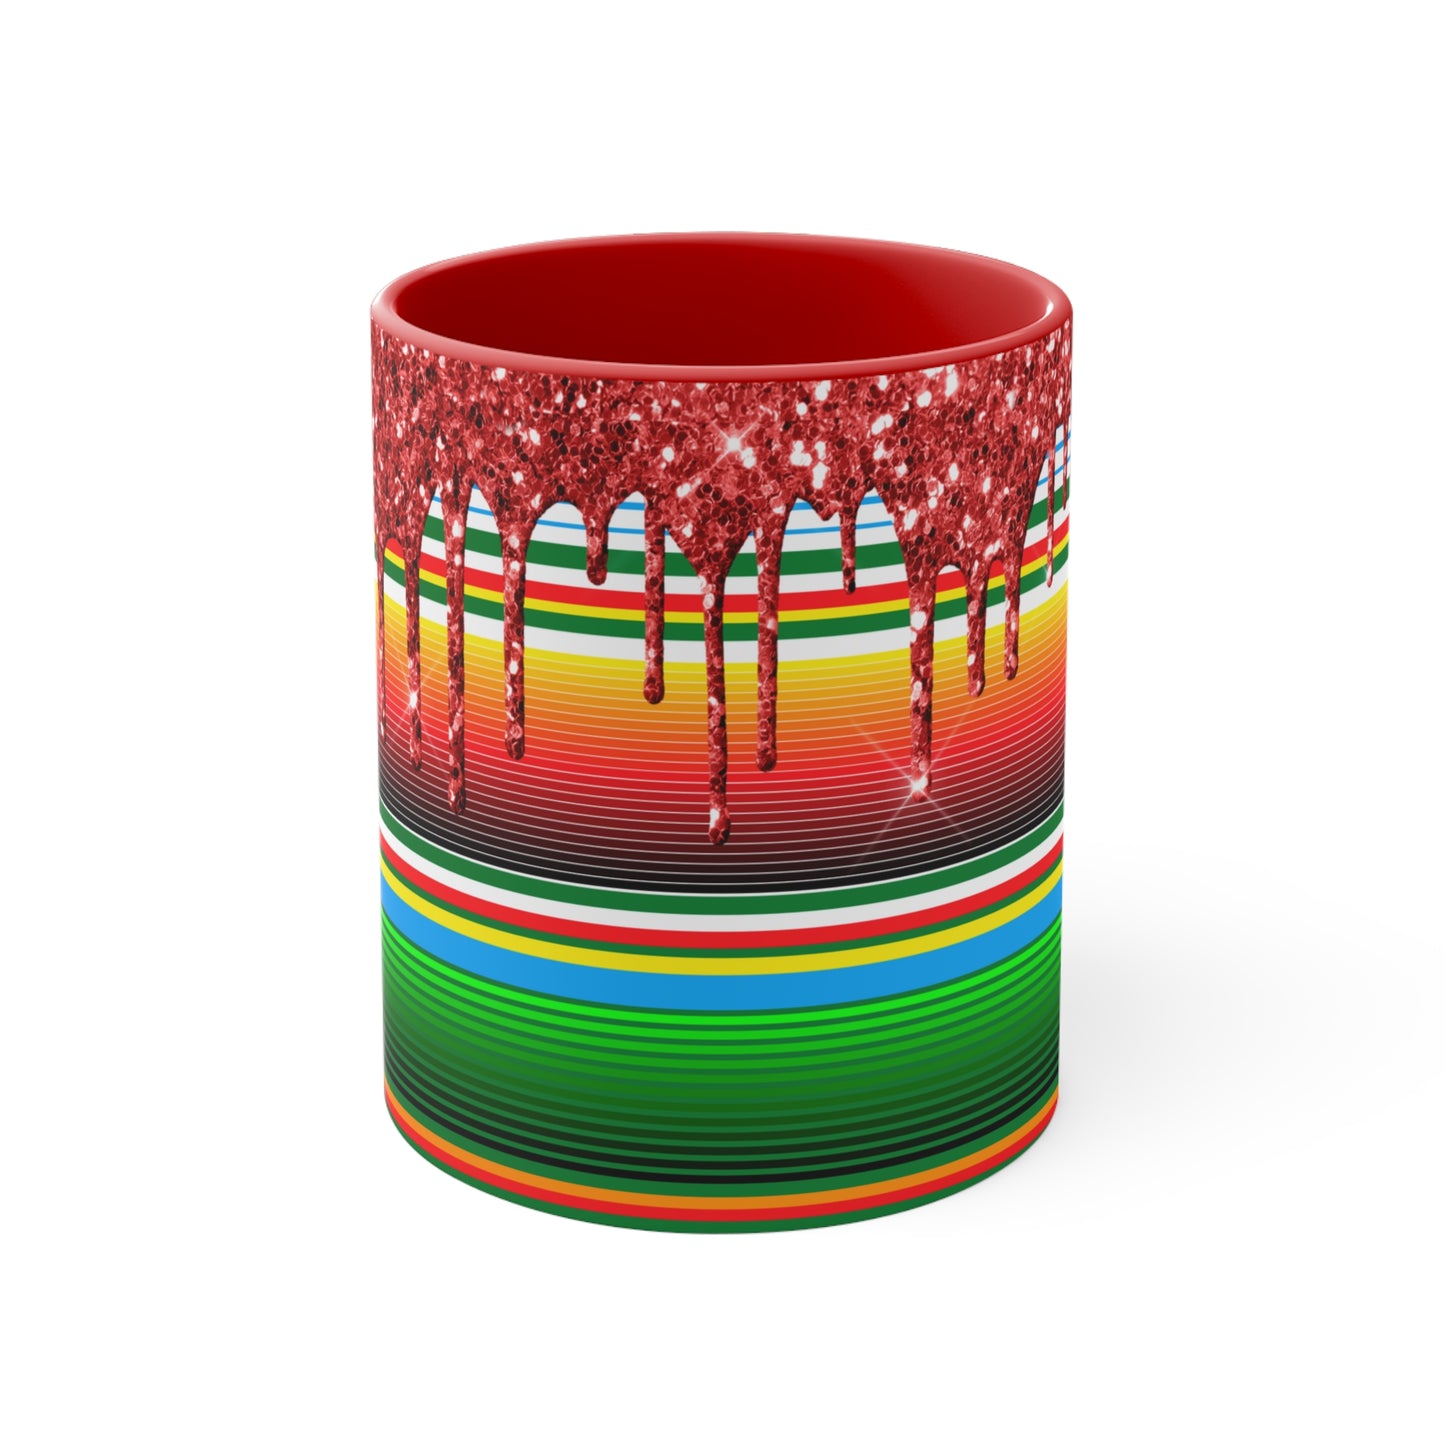 Serape Blanket with Red Glitter Dripping - Accent Coffee Mug, 11oz